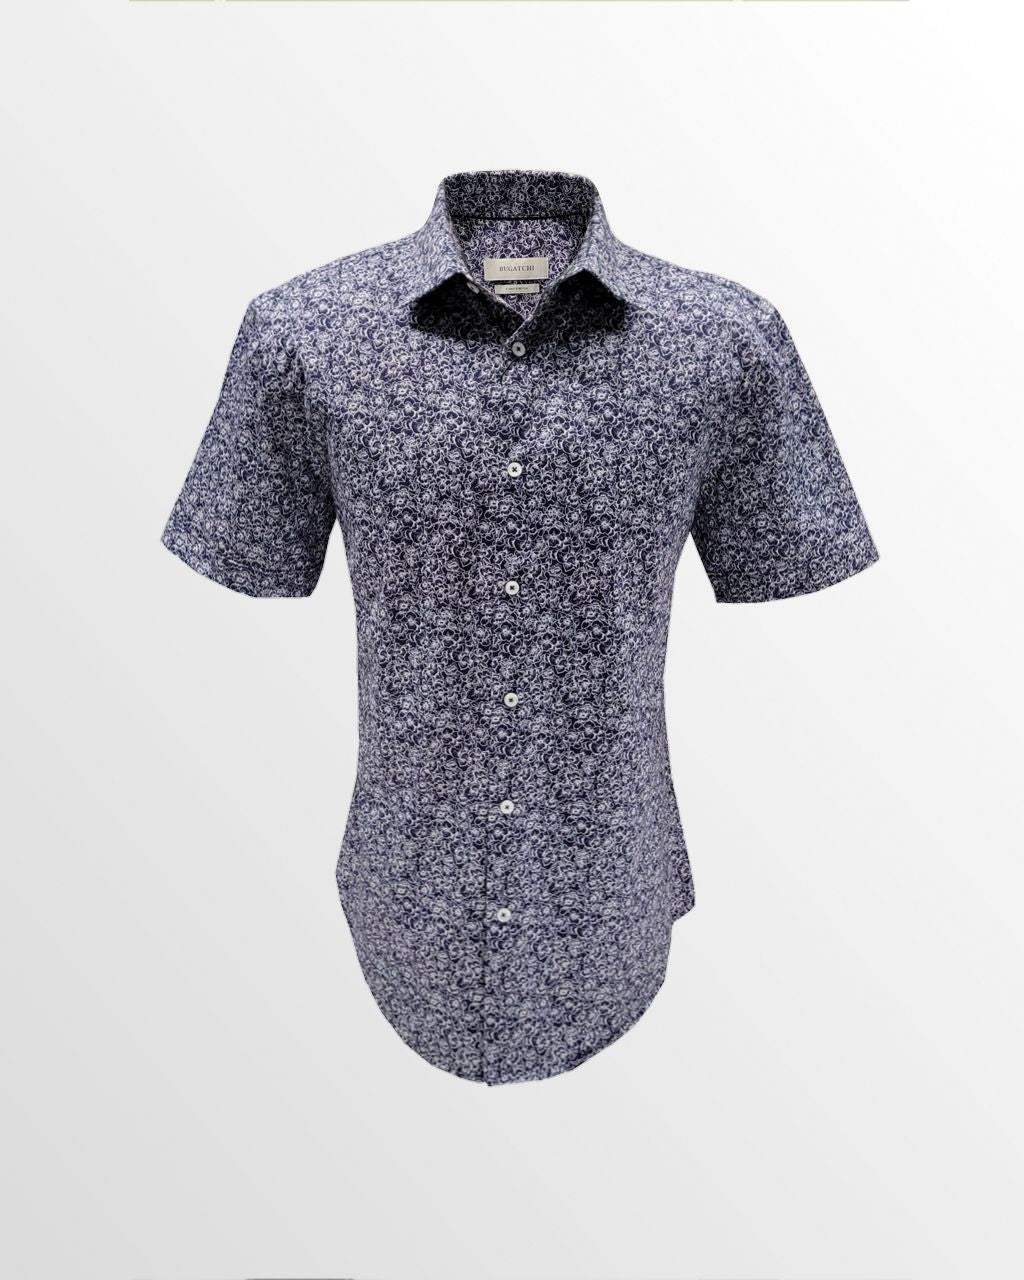 Bugatchi OoohCotton Casual Shirt in Navy Floral